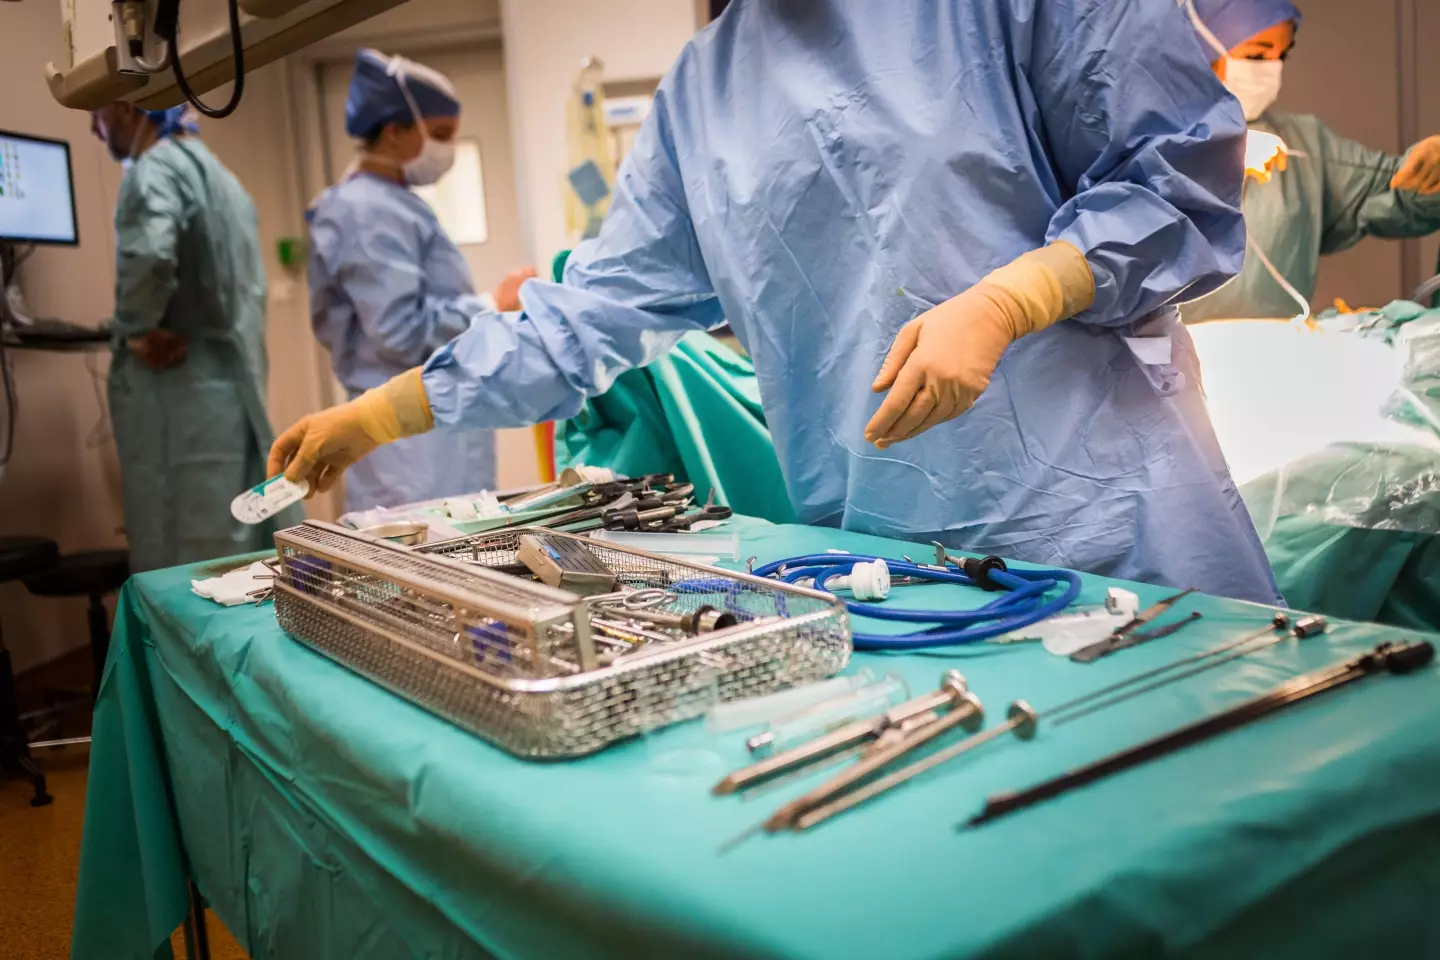 A surgeon is planning the world's first womb transplant on a trans woman.